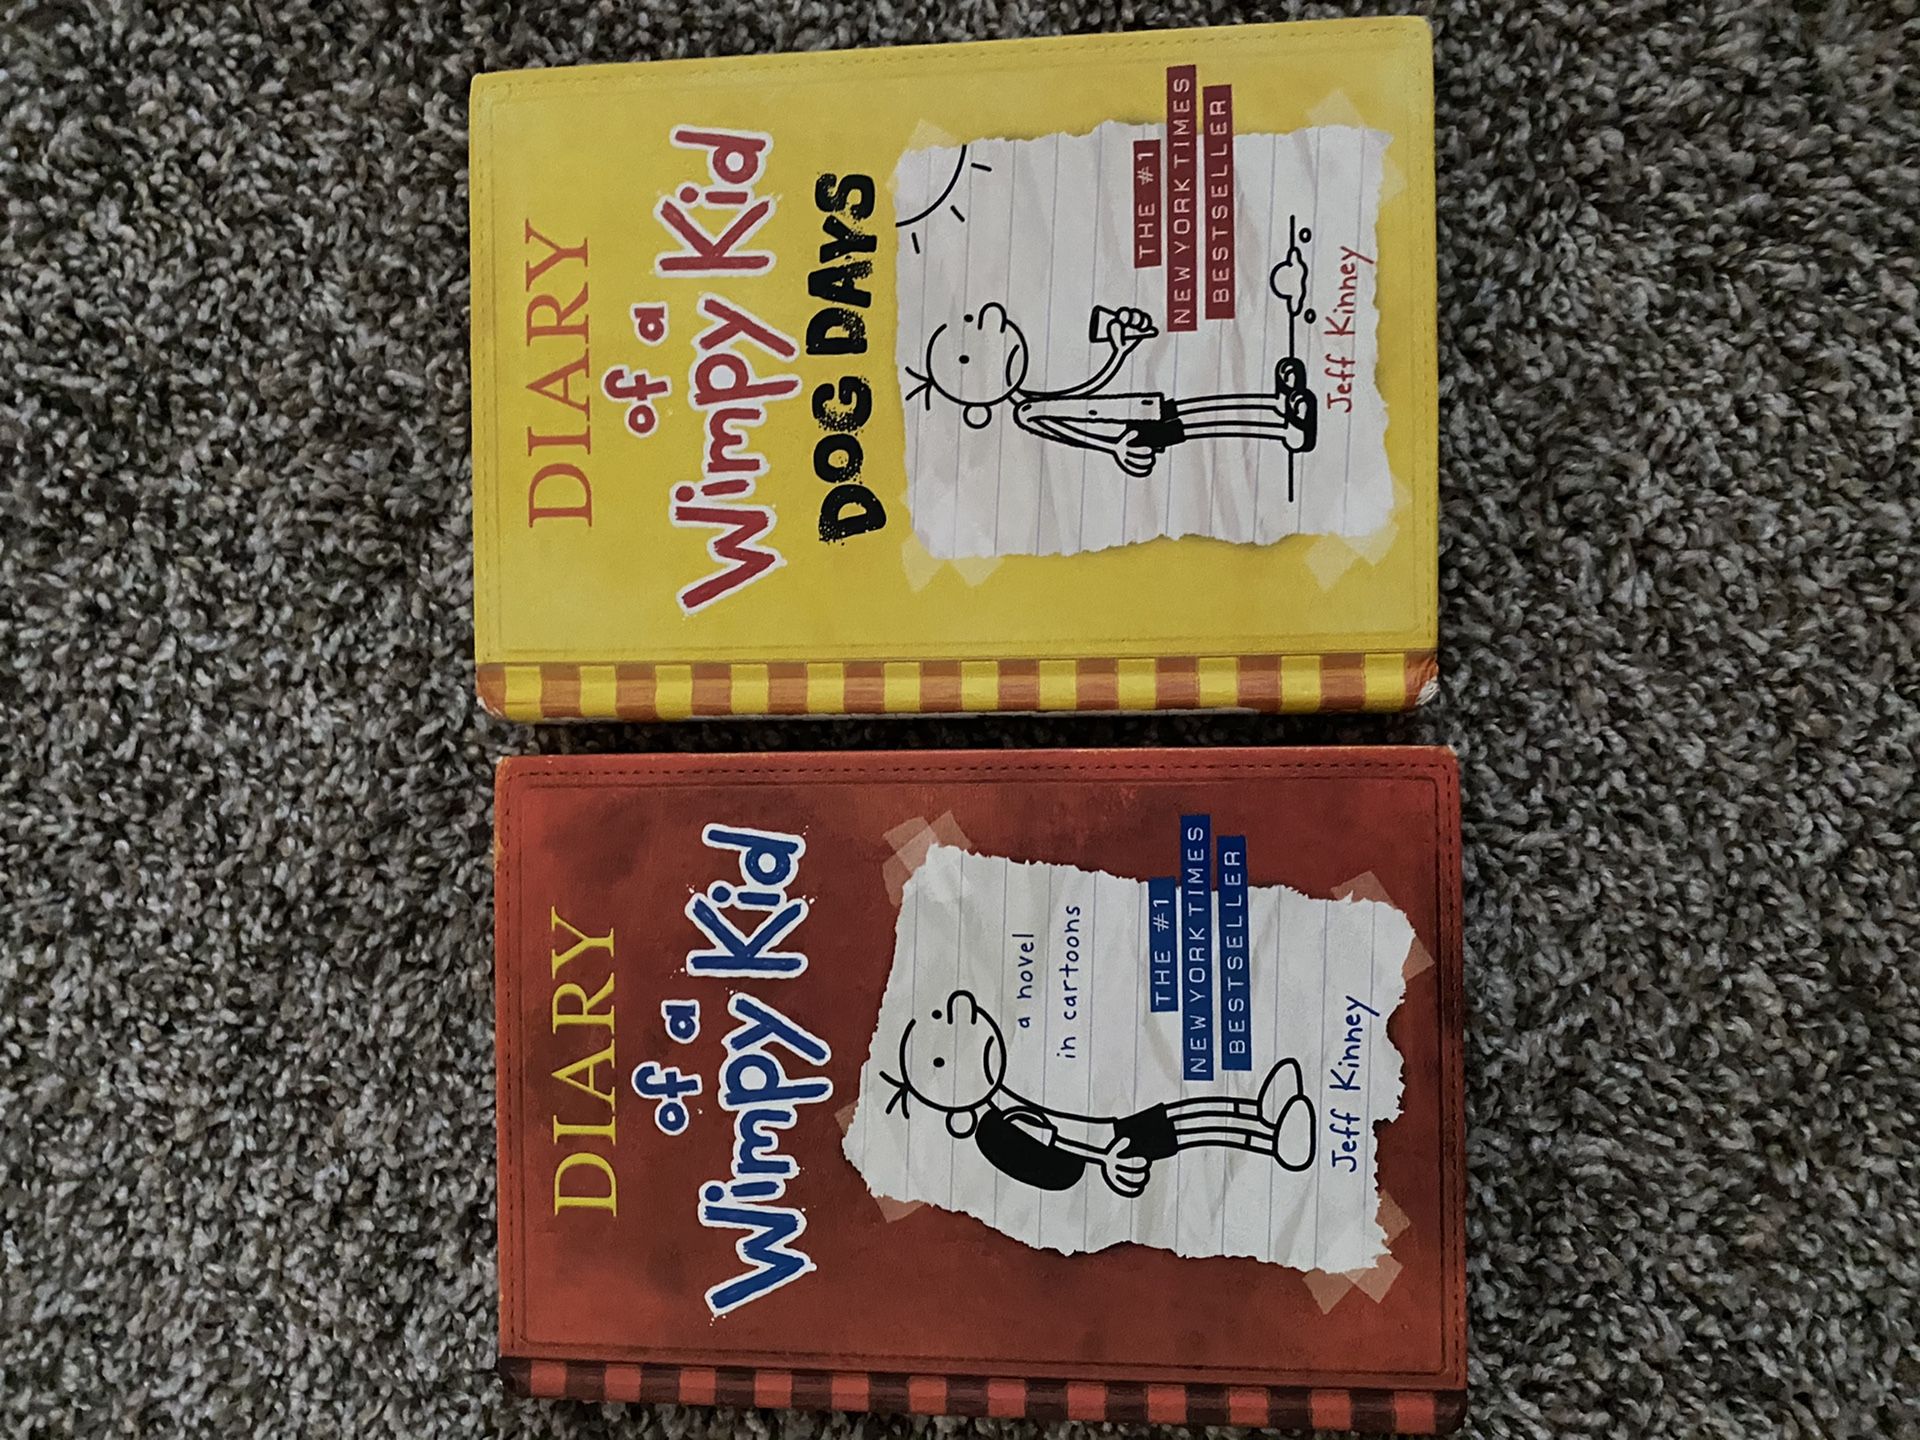 Diary of a wimpy kid in excellent condition